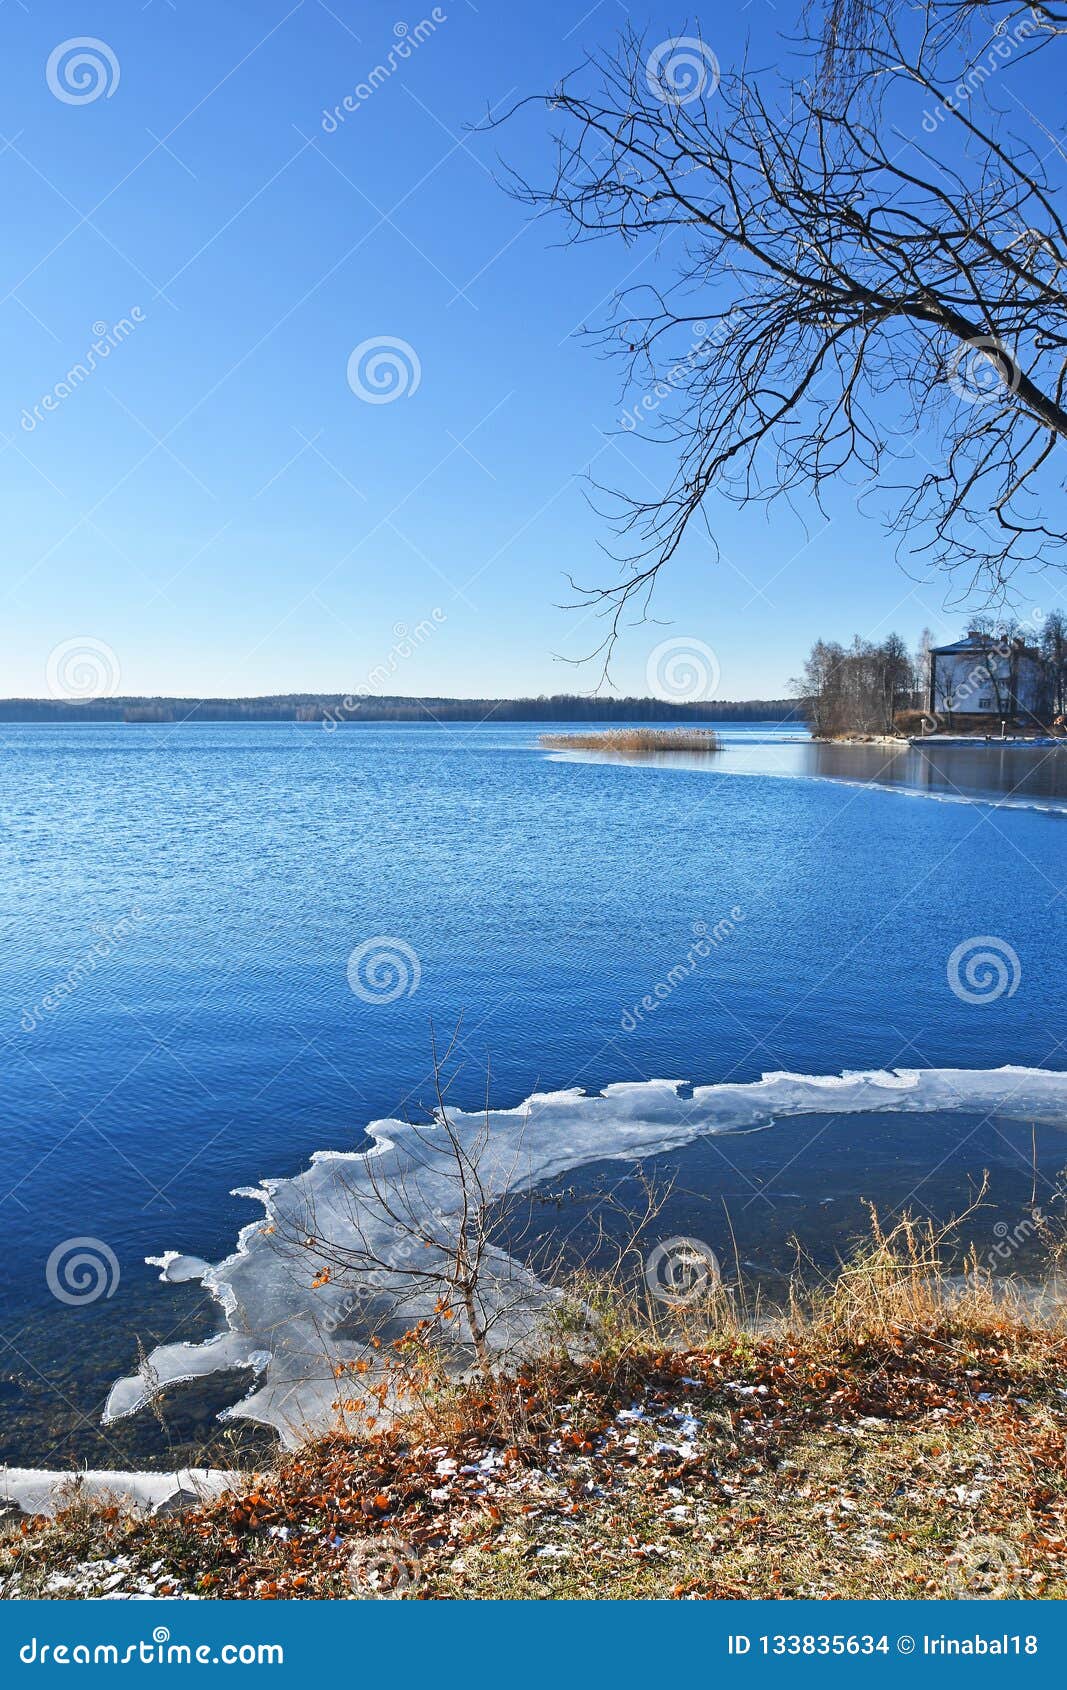 thin ice on the lake uvildy in late autumn in sunny day